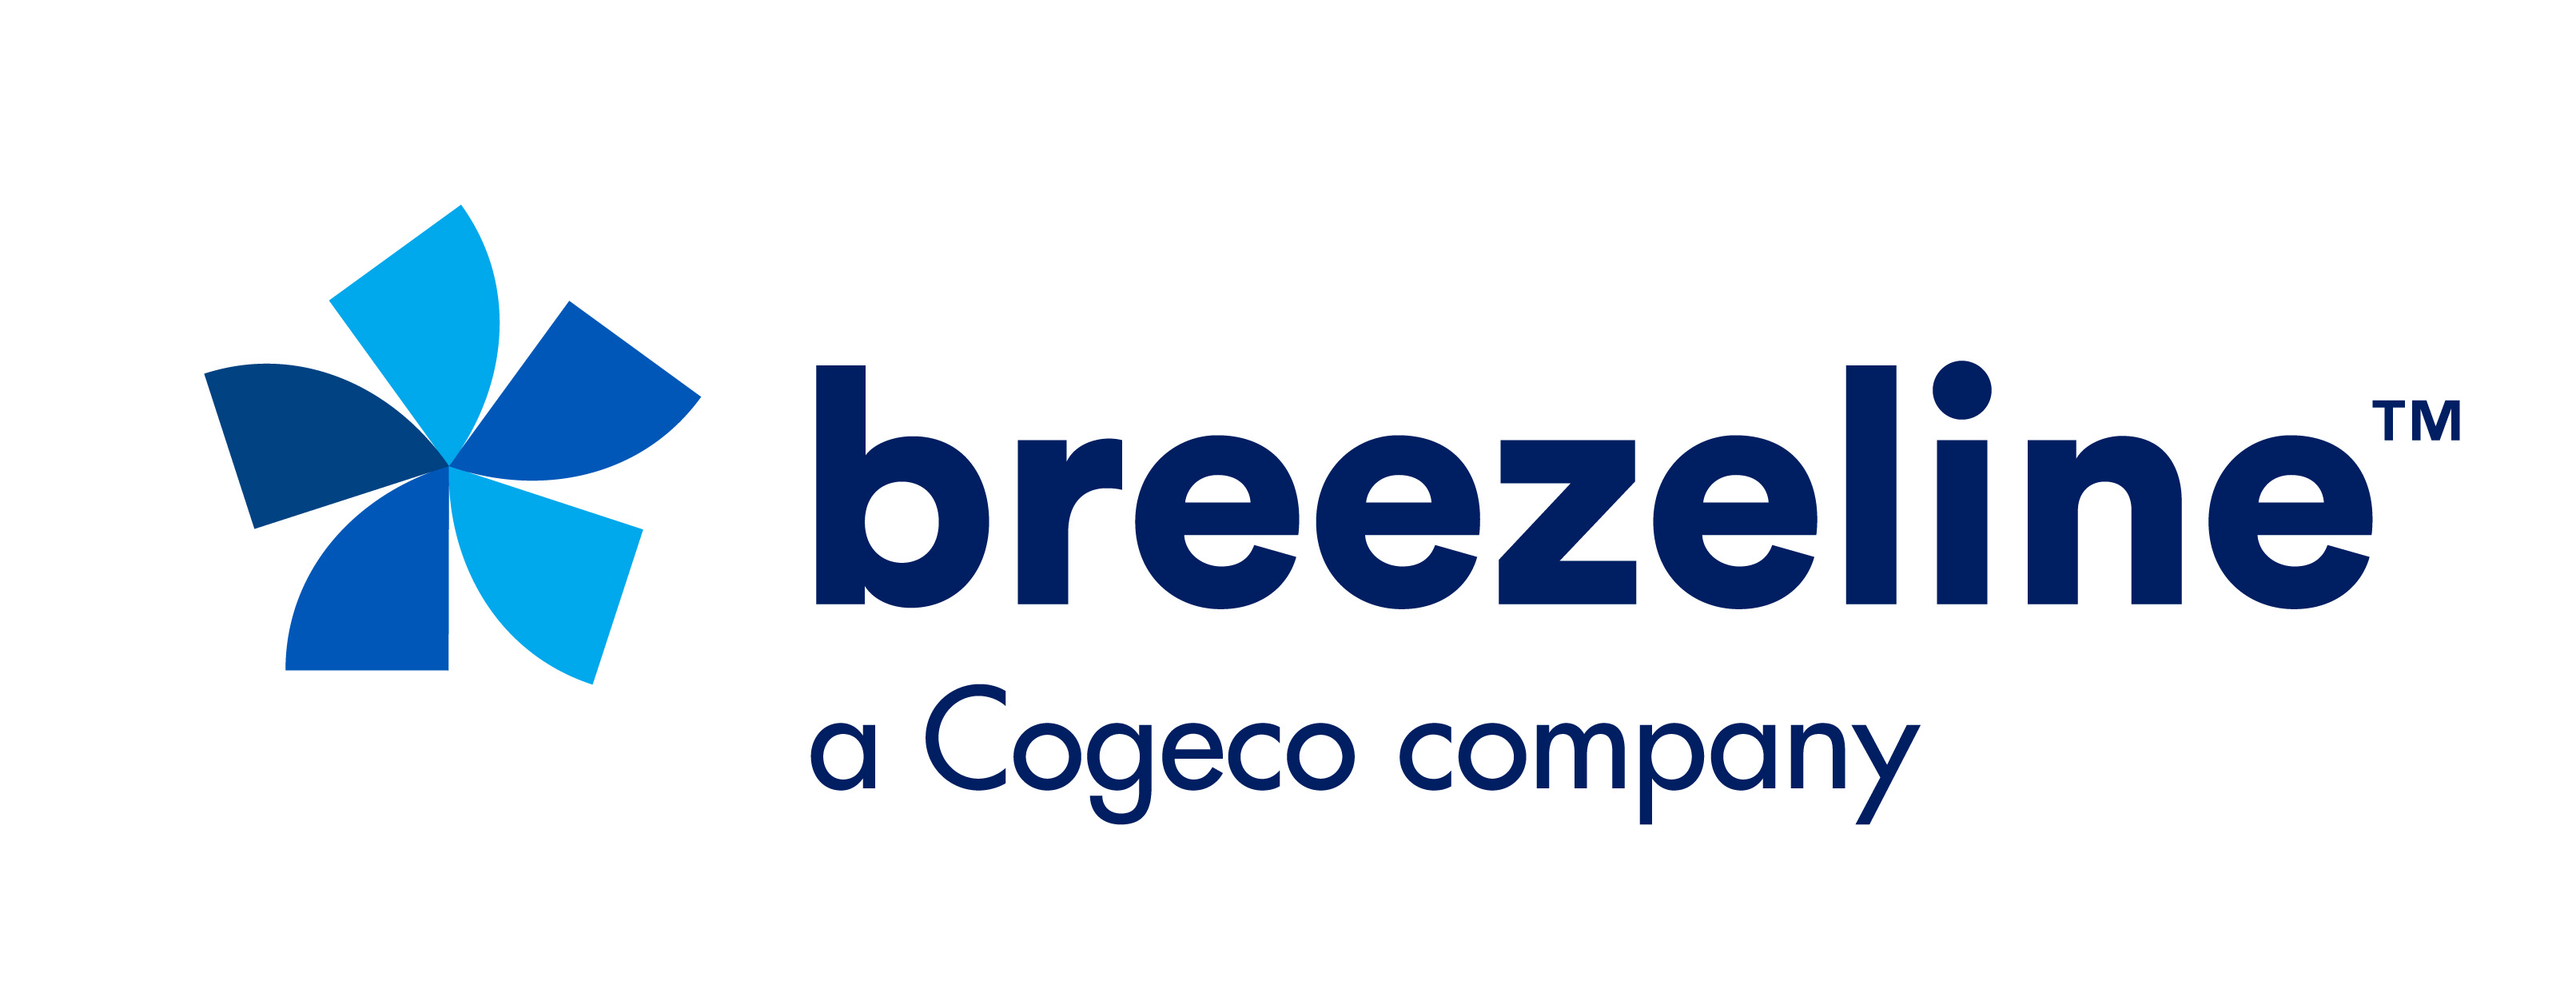 Breezeline is the eighth-largest cable operator in the United States. The company provides its residential and business customers with Internet, TV, and Voice services in 13 states: Connecticut, Delaware, Florida, Maine, Maryland, Massachusetts, New Hampshire, New York, Ohio, Pennsylvania, South Carolina, Virginia and West Virginia. Breezeline is a subsidiary of Cogeco Communications (TSX: CCA), which also operates in Canada, under the Cogeco Connexion name.